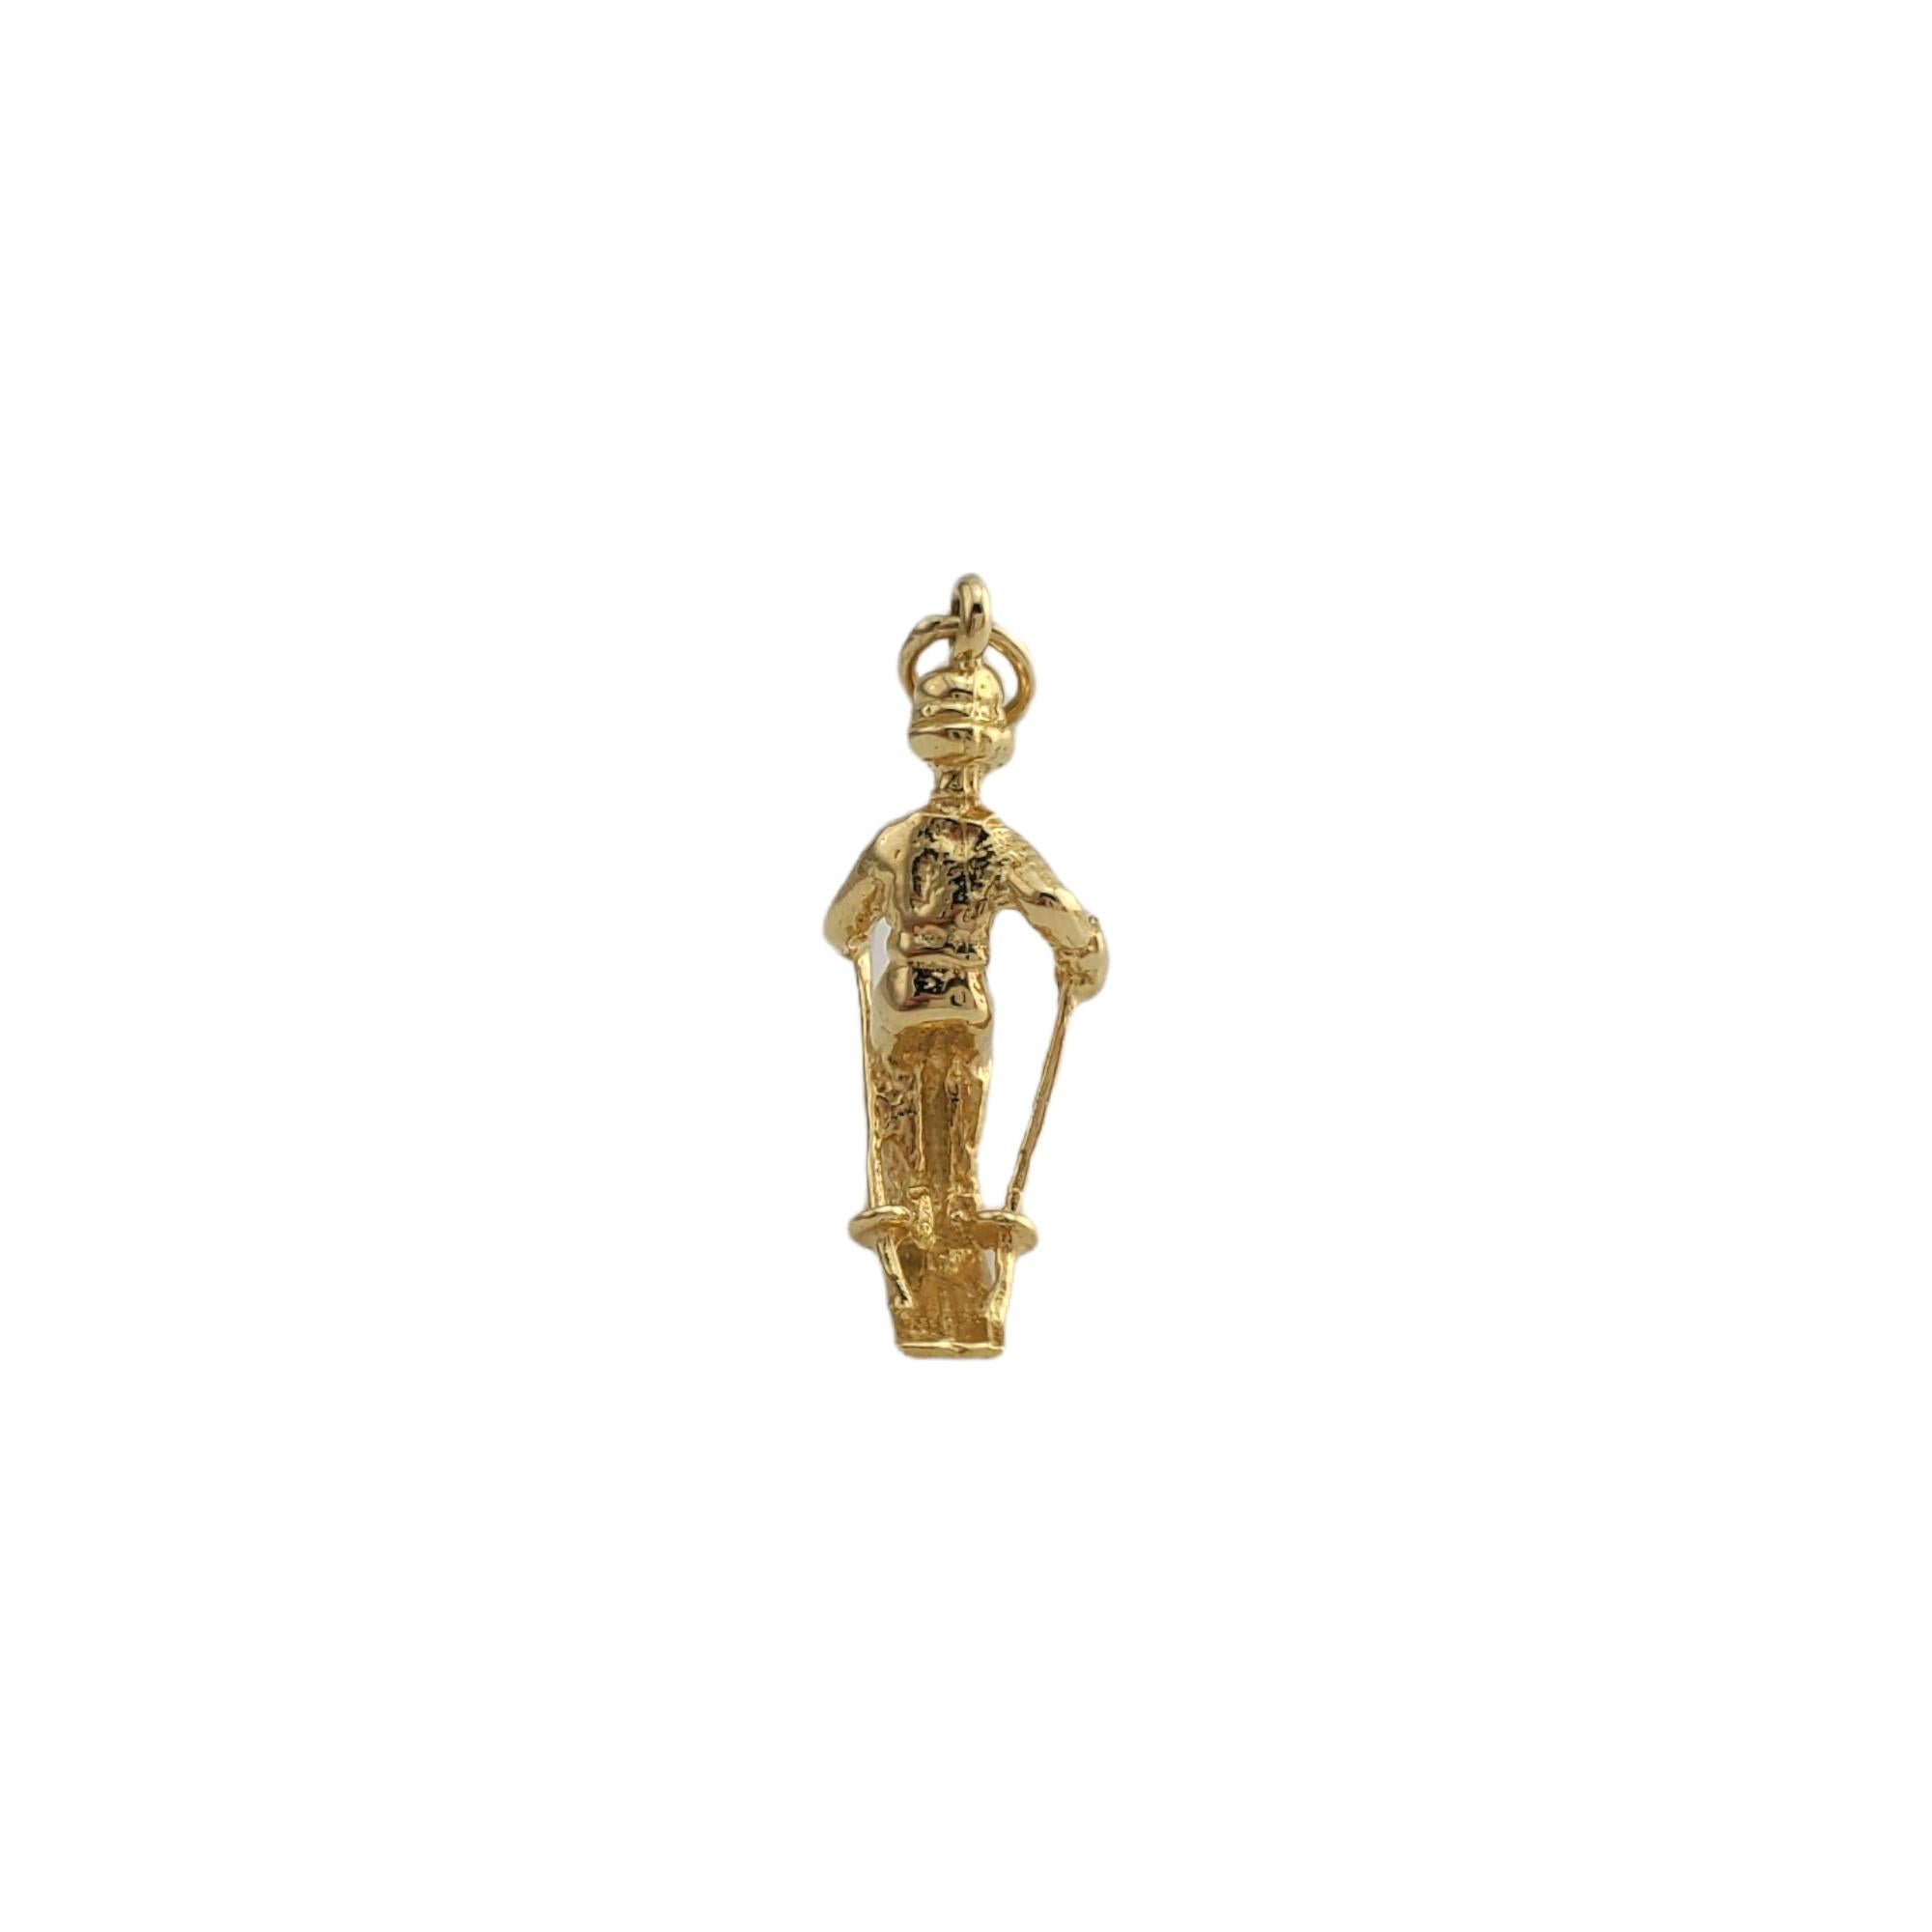 18K Yellow Gold Skier Charm 

Beautiful 18K yellow gold skier charm! 

Size: 9.98mm X 23.75mm

Weight:  4.4gr /  2.8dwt

Very good condition, professionally polished.

Will come packaged in a gift box and will be shipped U.S. Priority Mail